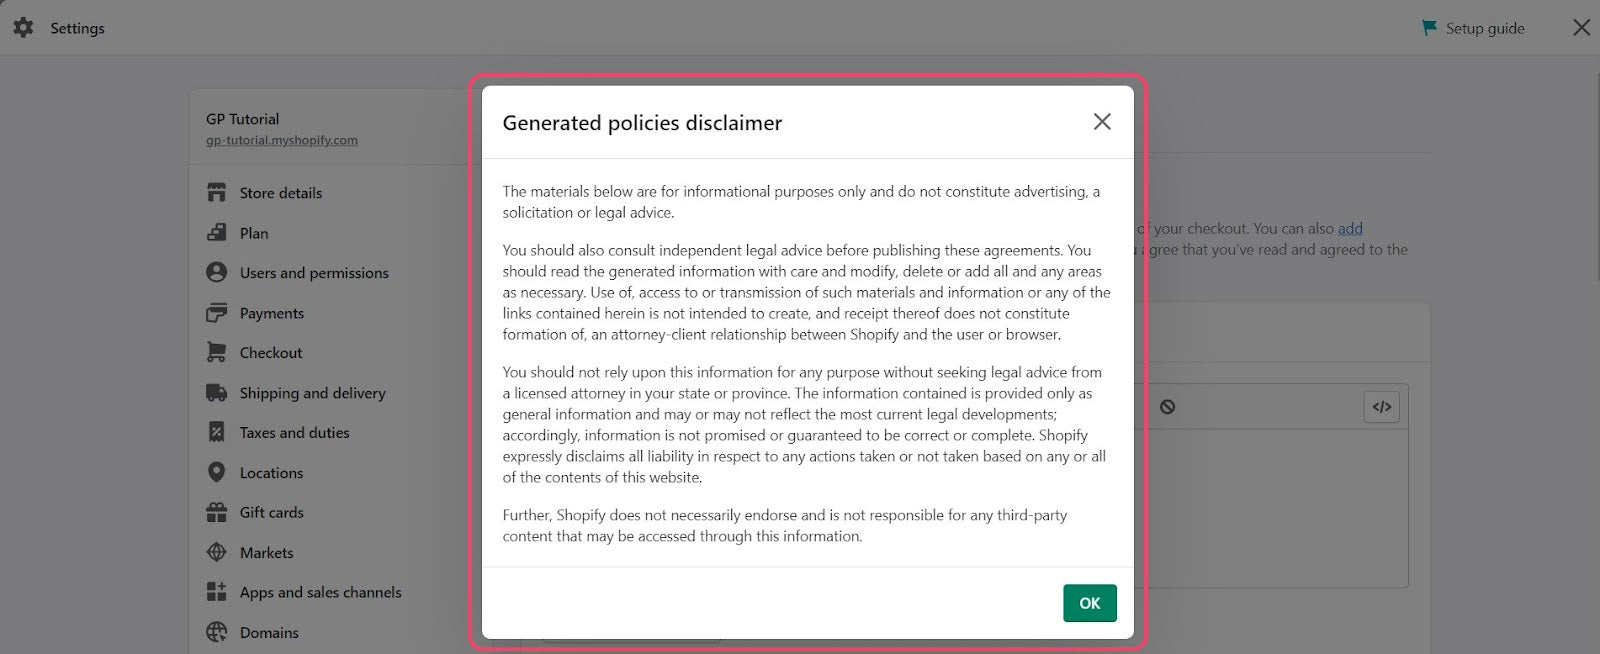 Generated policies disclaimer